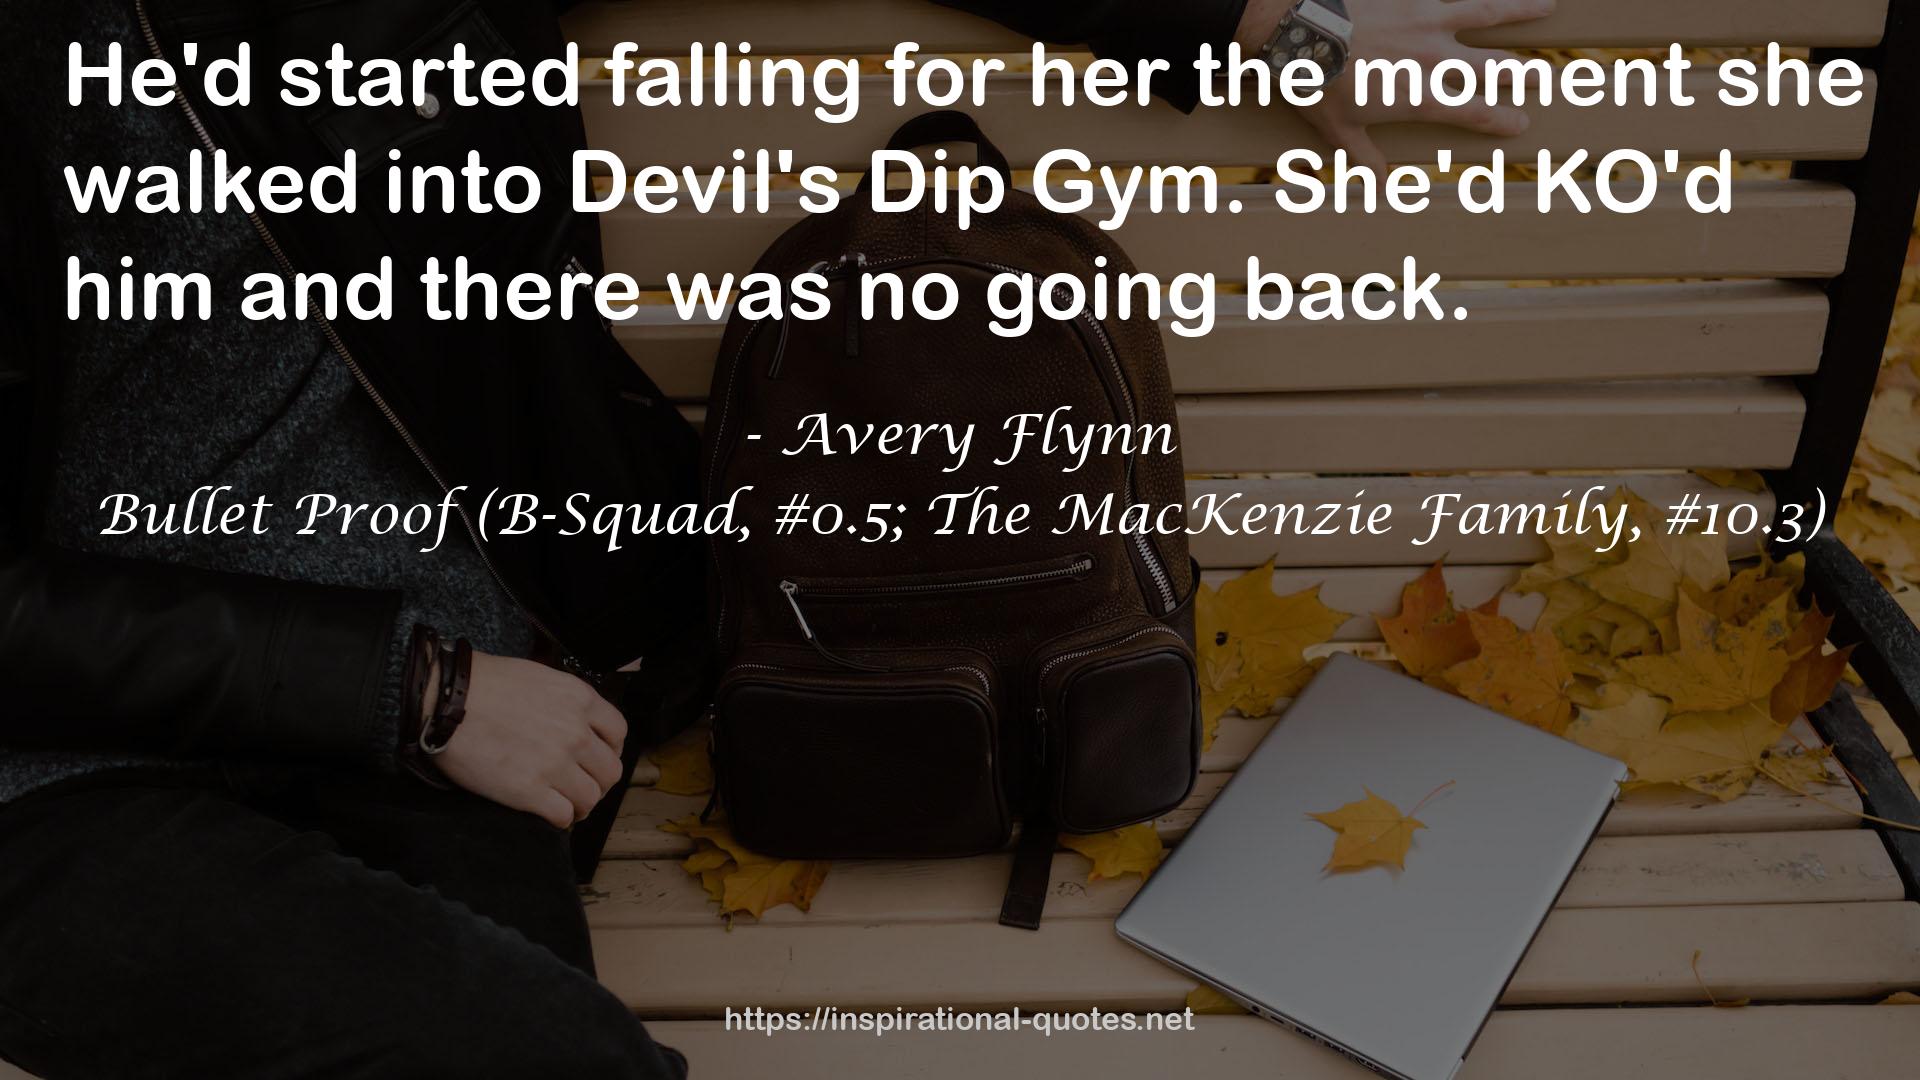 Bullet Proof (B-Squad, #0.5; The MacKenzie Family, #10.3) QUOTES